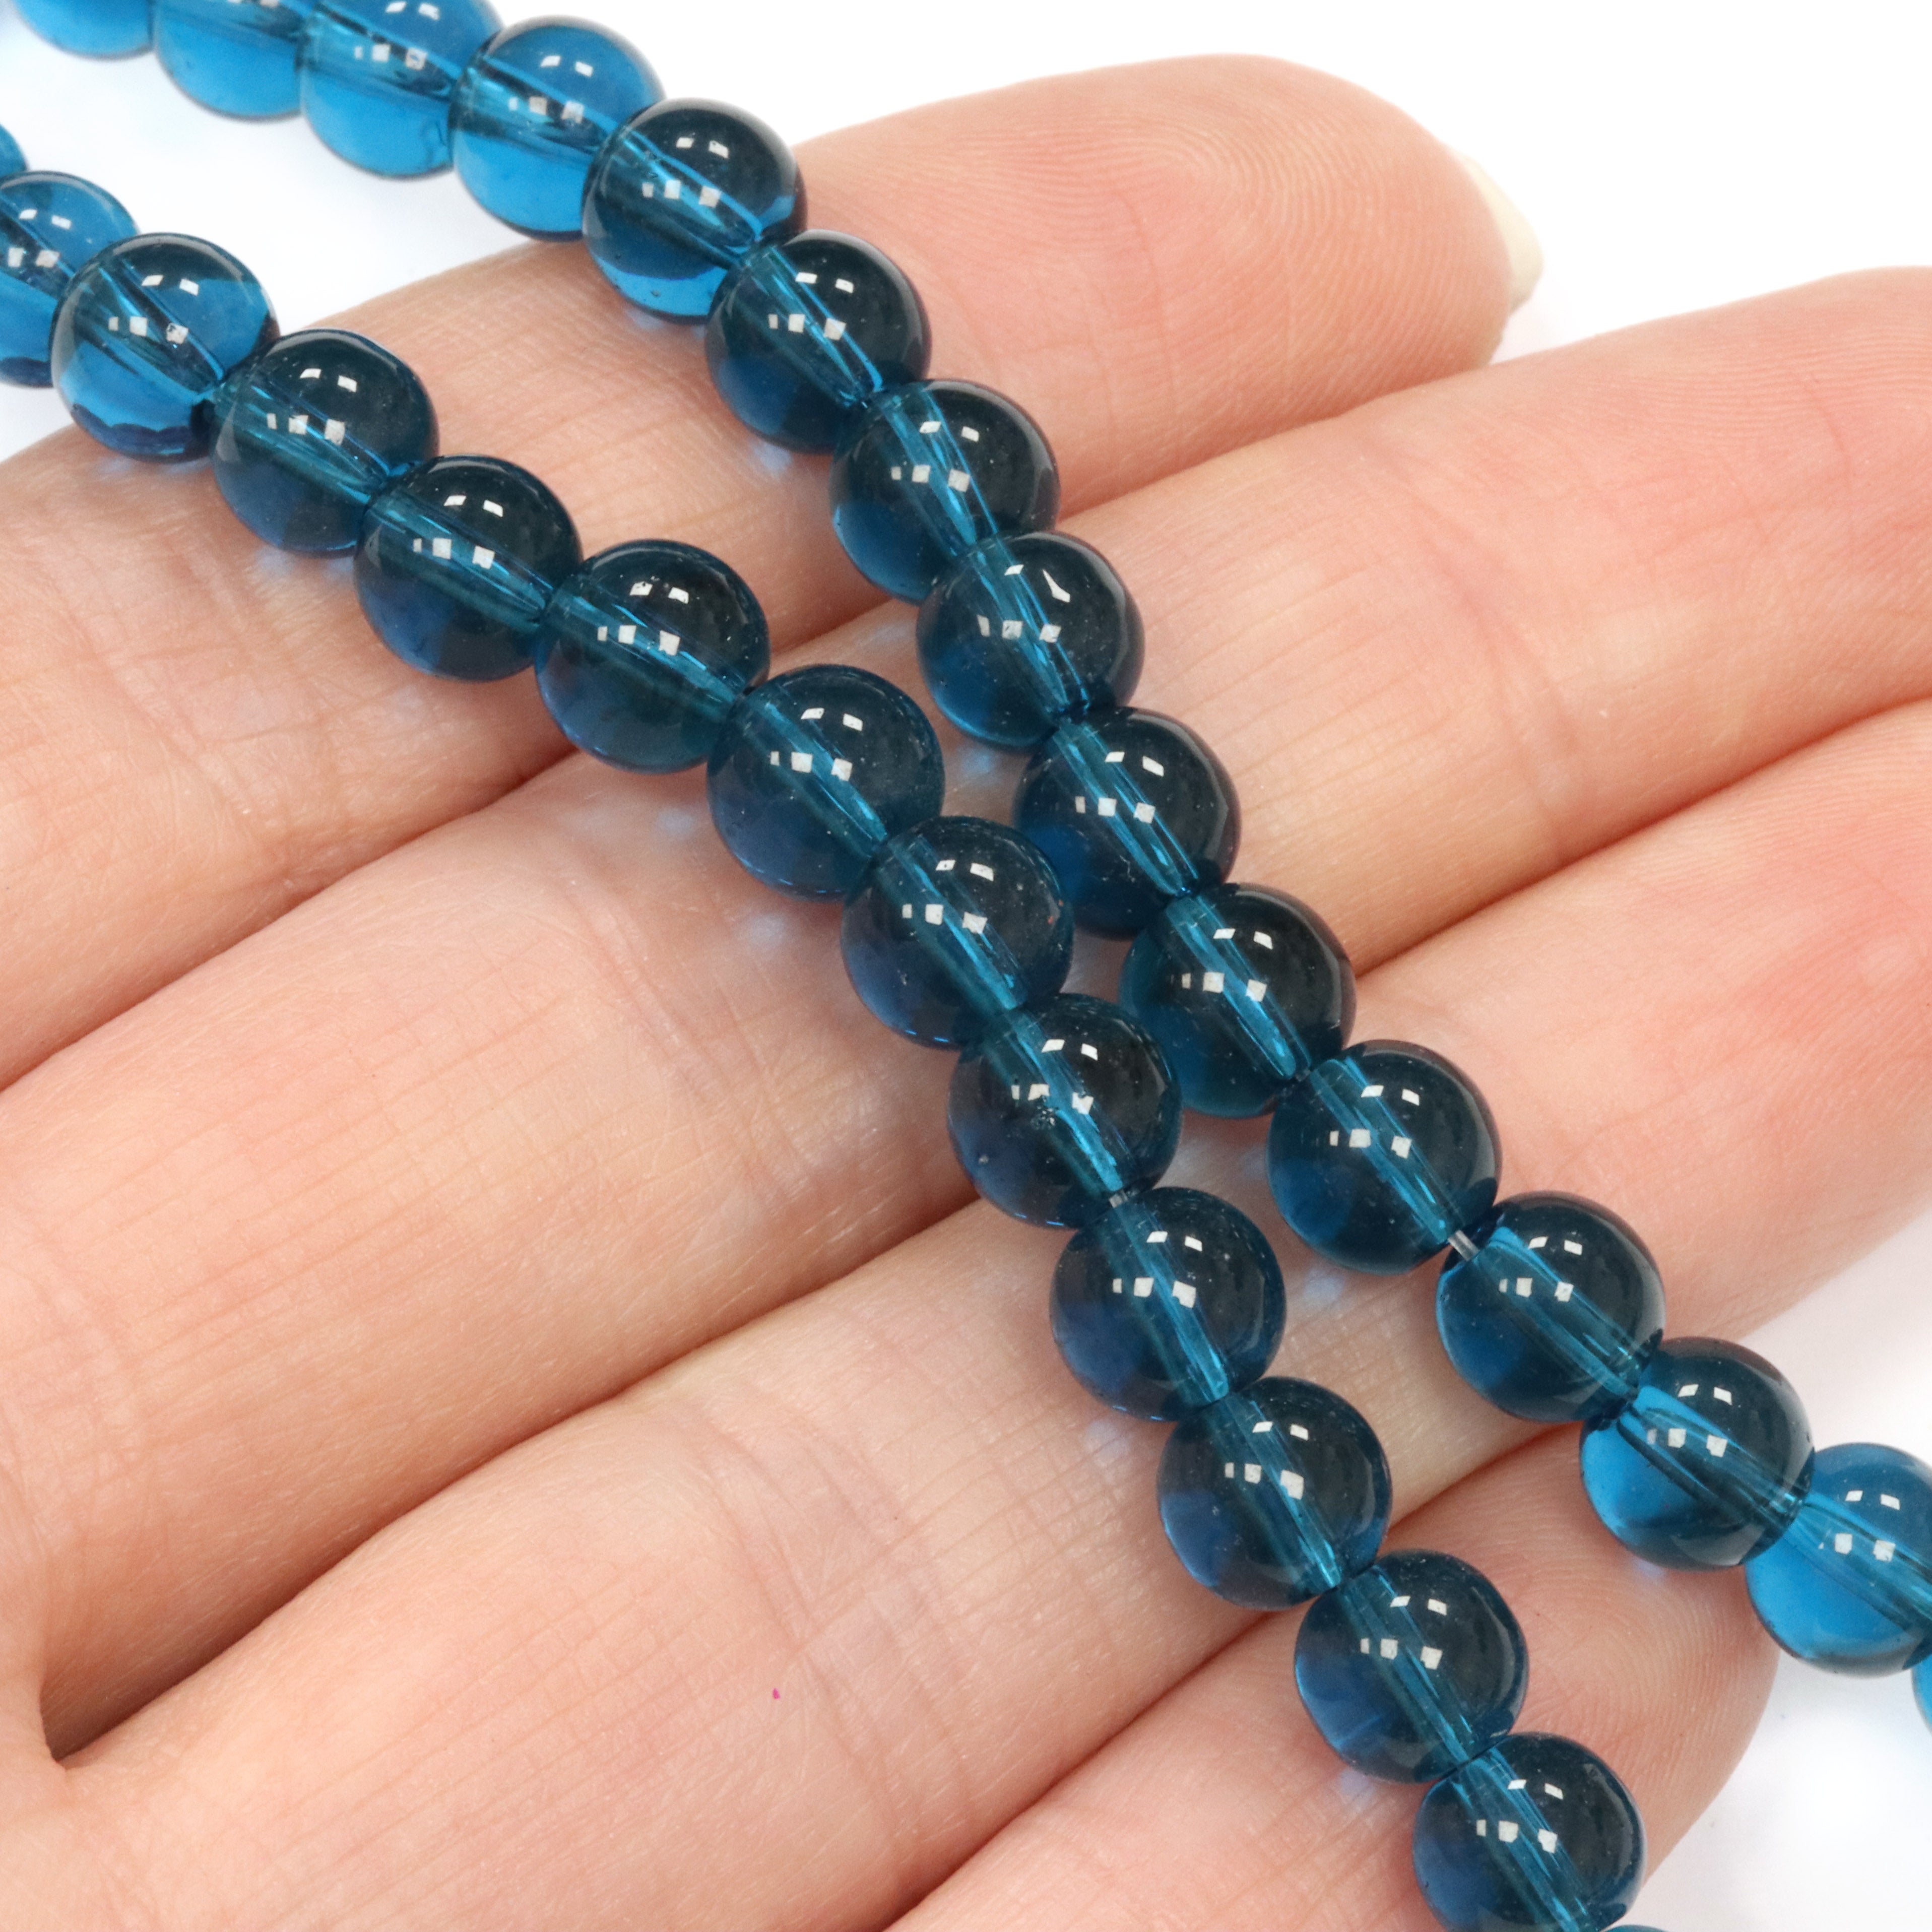 Glass Round Teal 6mm - 1 String